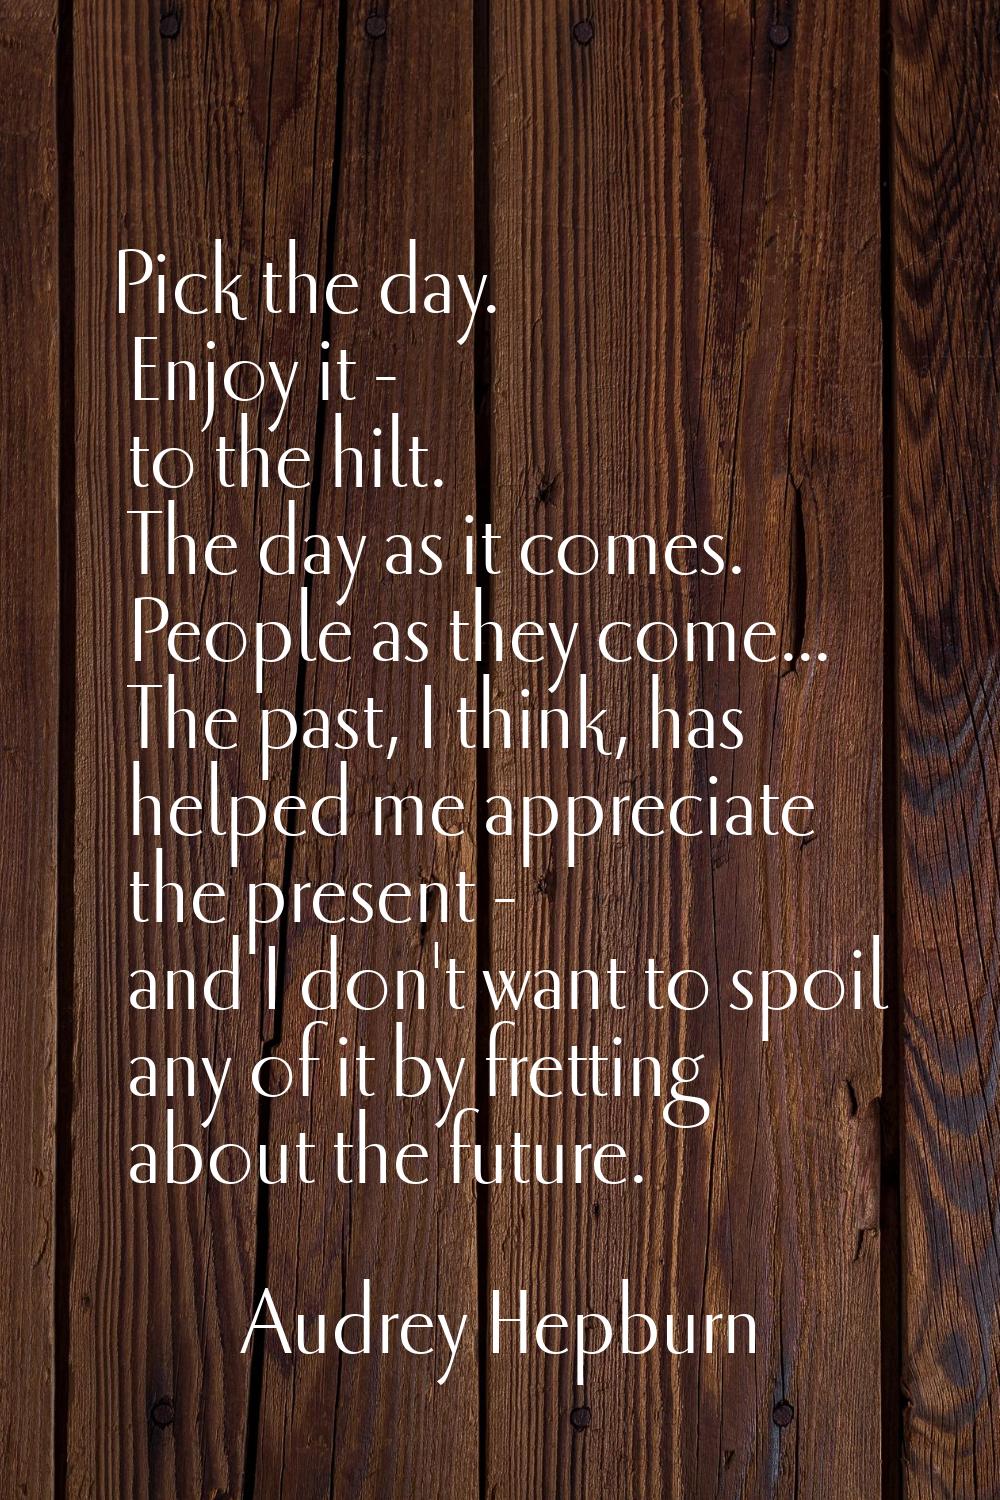 Pick the day. Enjoy it - to the hilt. The day as it comes. People as they come... The past, I think